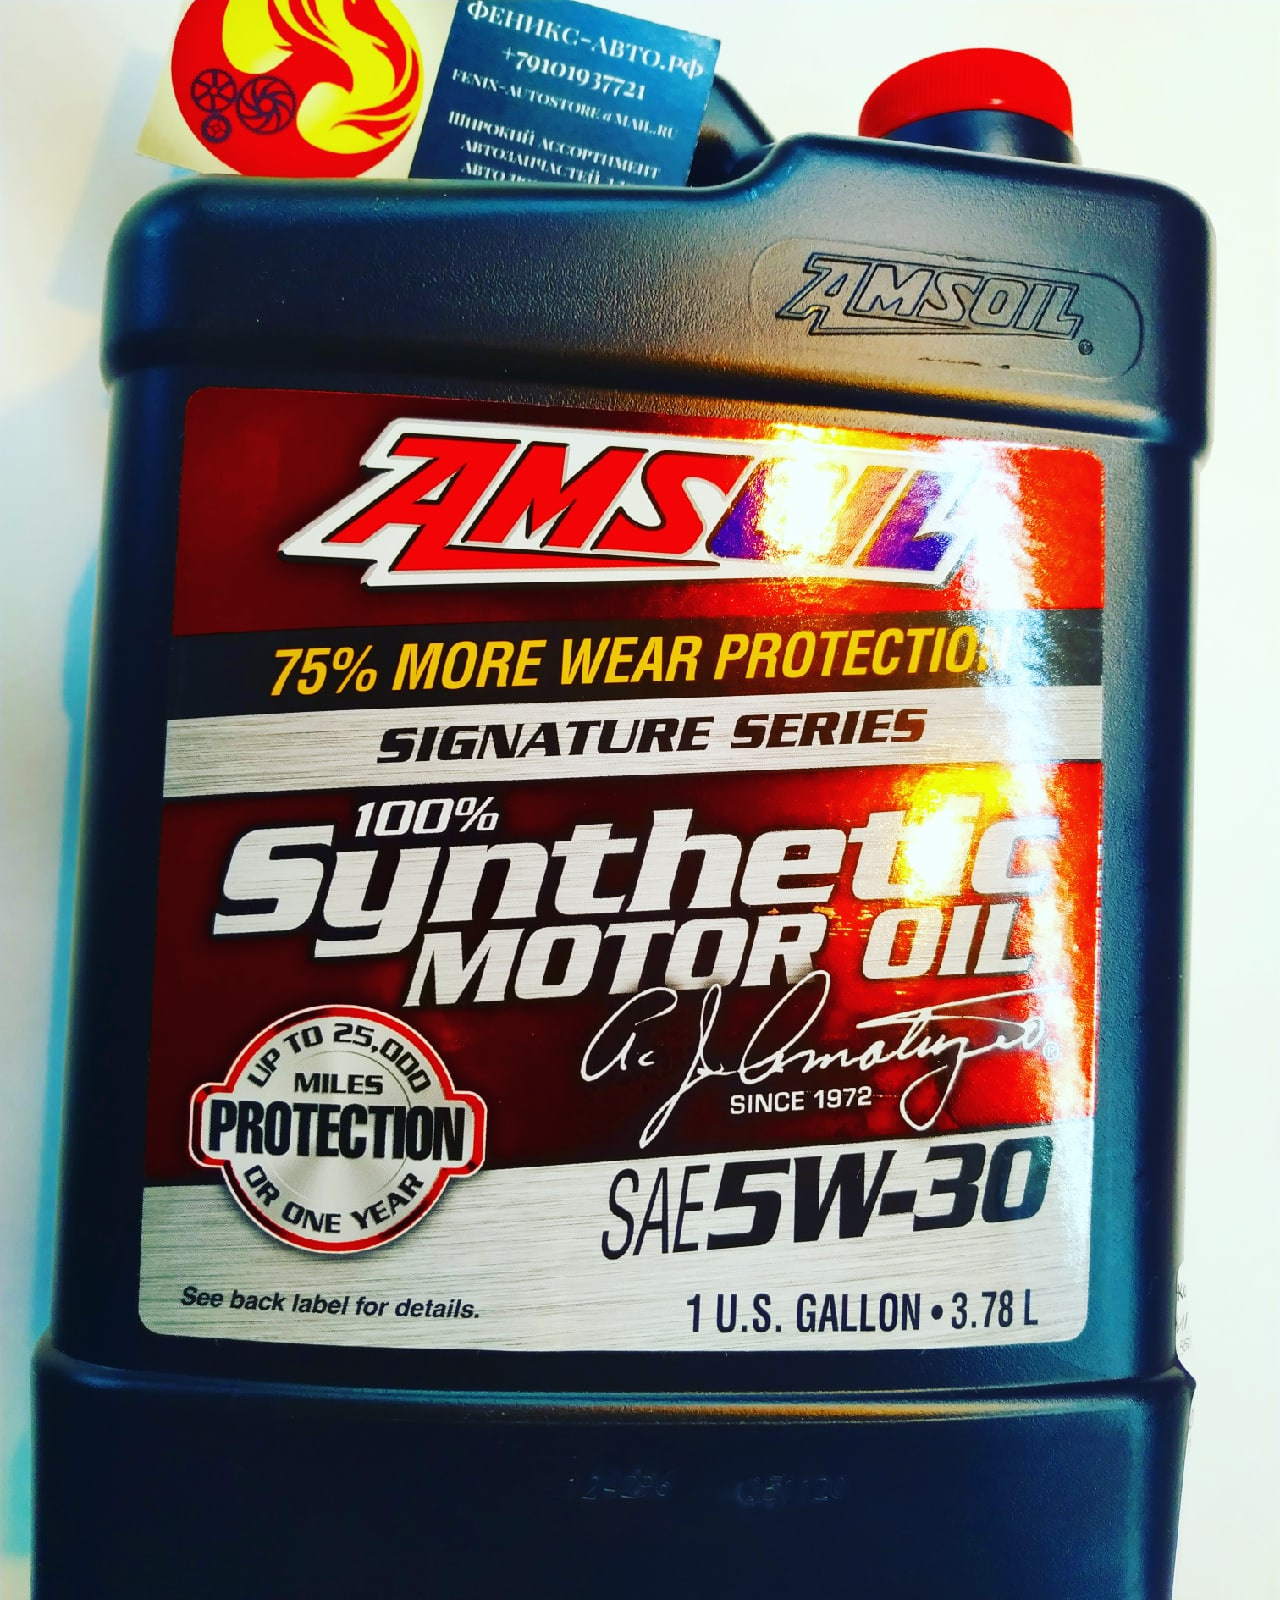 Signature series synthetic. AMSOIL Signature Series 5w-30. AMSOIL Signature Series Synthetic Motor Oil SAE 5w-30. Аmsoil Signature Series 100% Synthetic 5w-30. AMSOIL Signature Series 5w-30 Synthetic Motor oi.